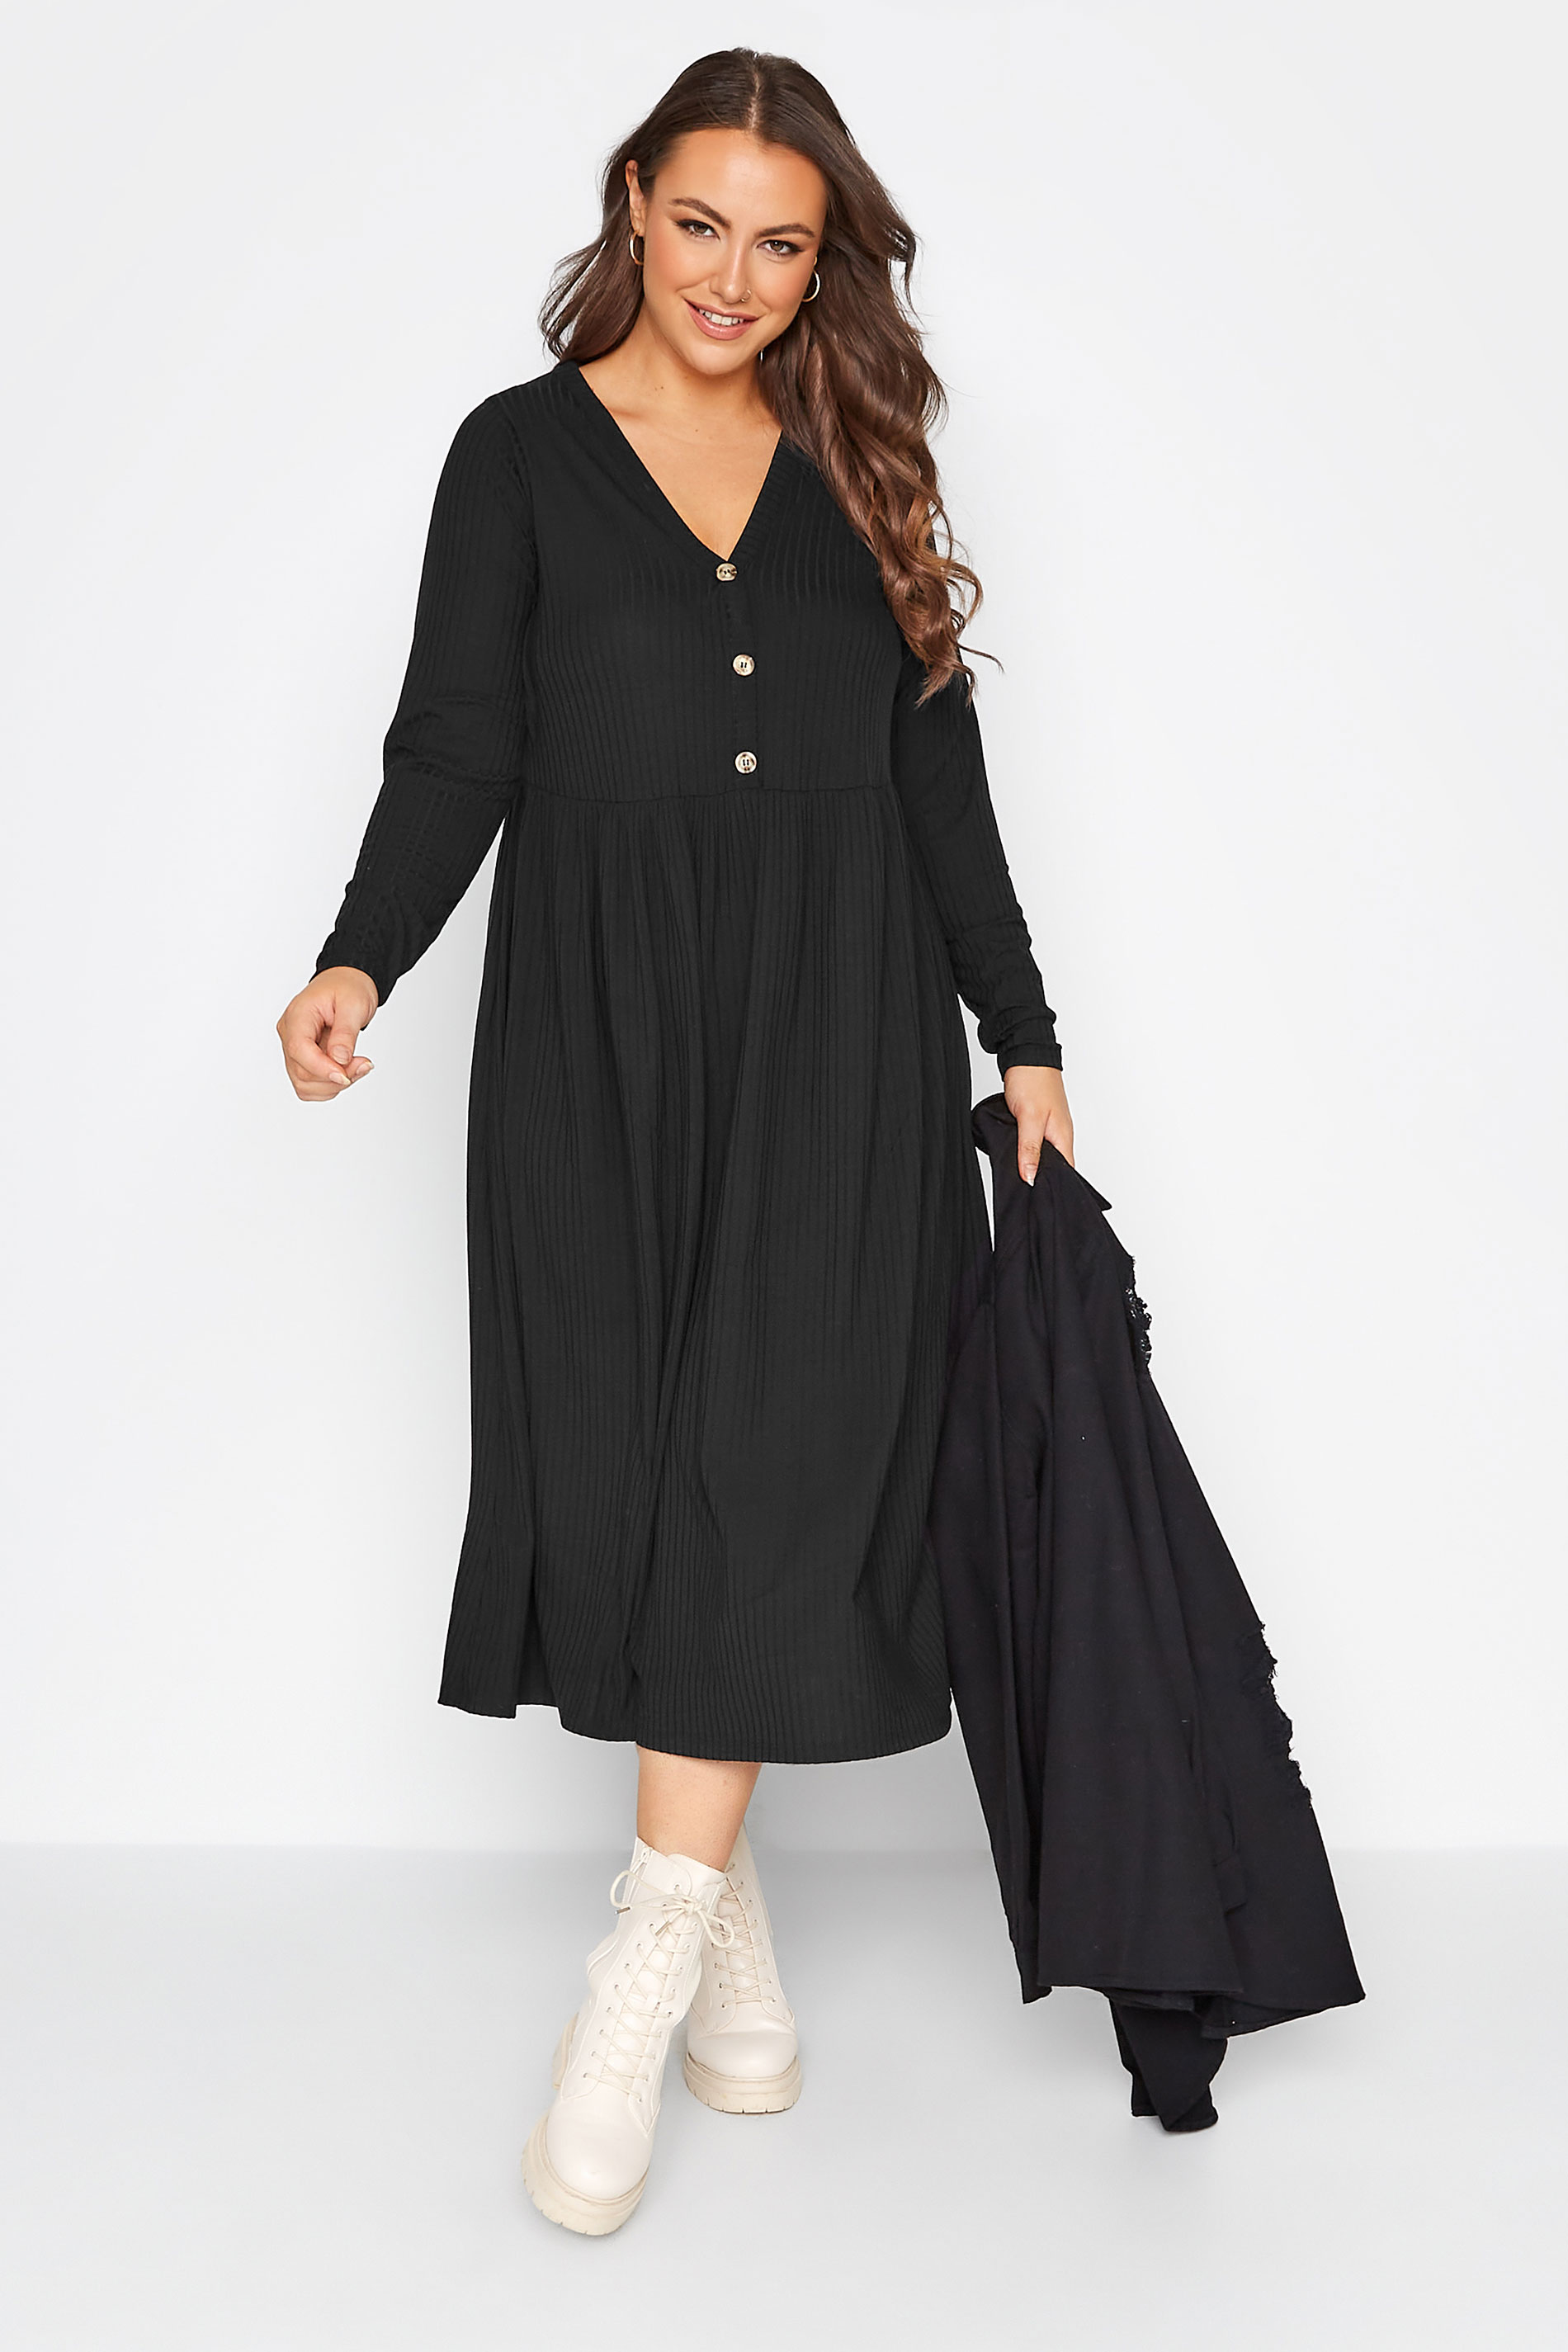 LIMITED COLLECTION Plus Size Black Ribbed Midaxi Dress | Yours Clothing 1